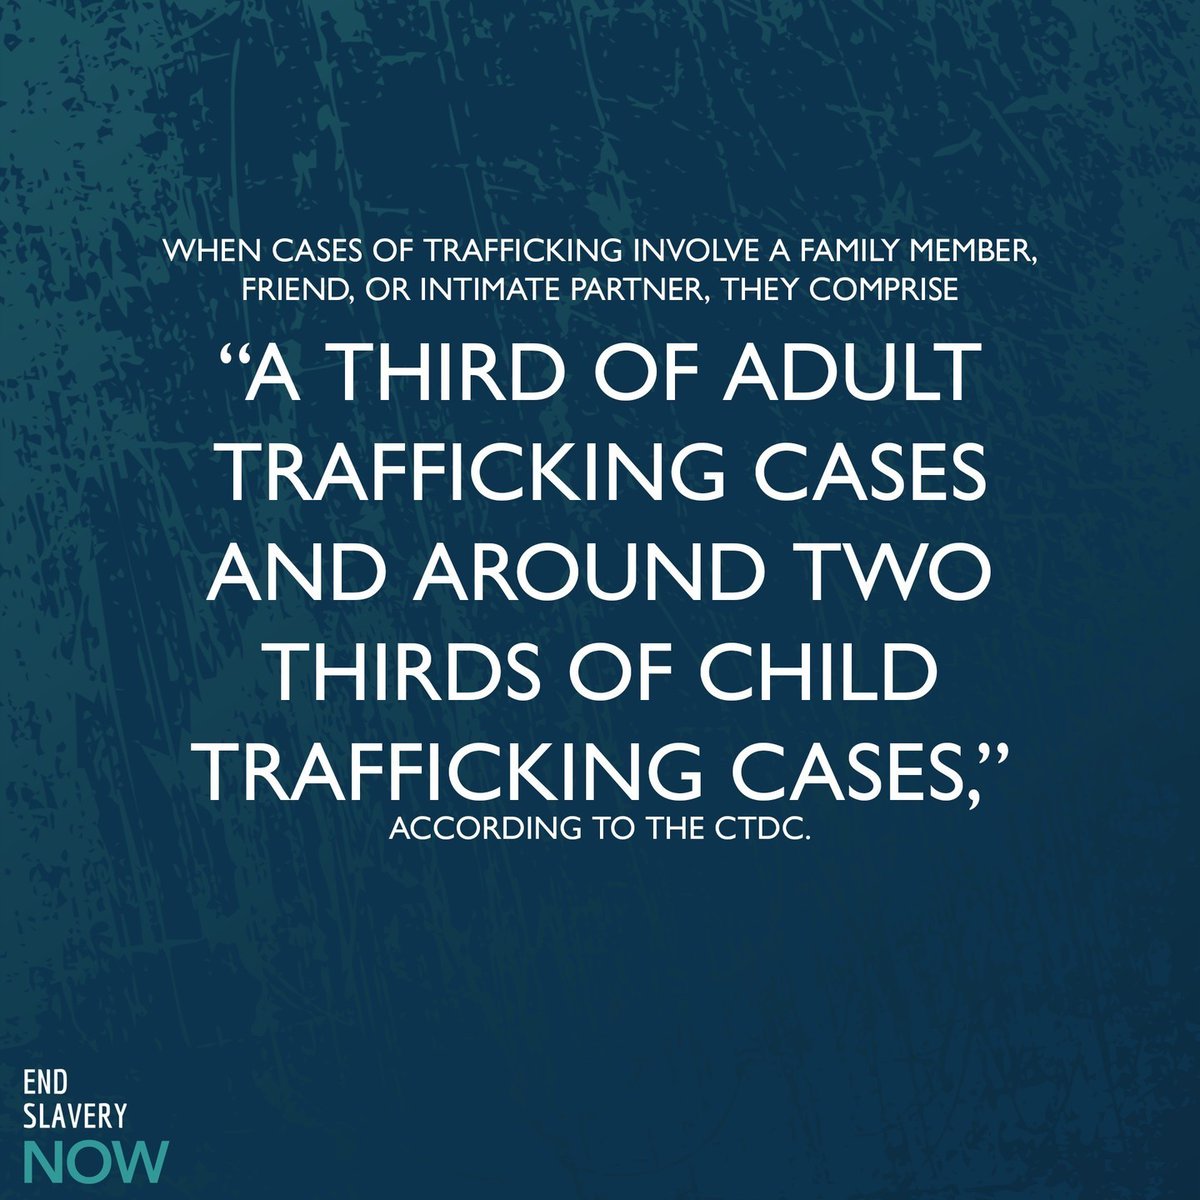 Children and adults are trafficked by people they know.